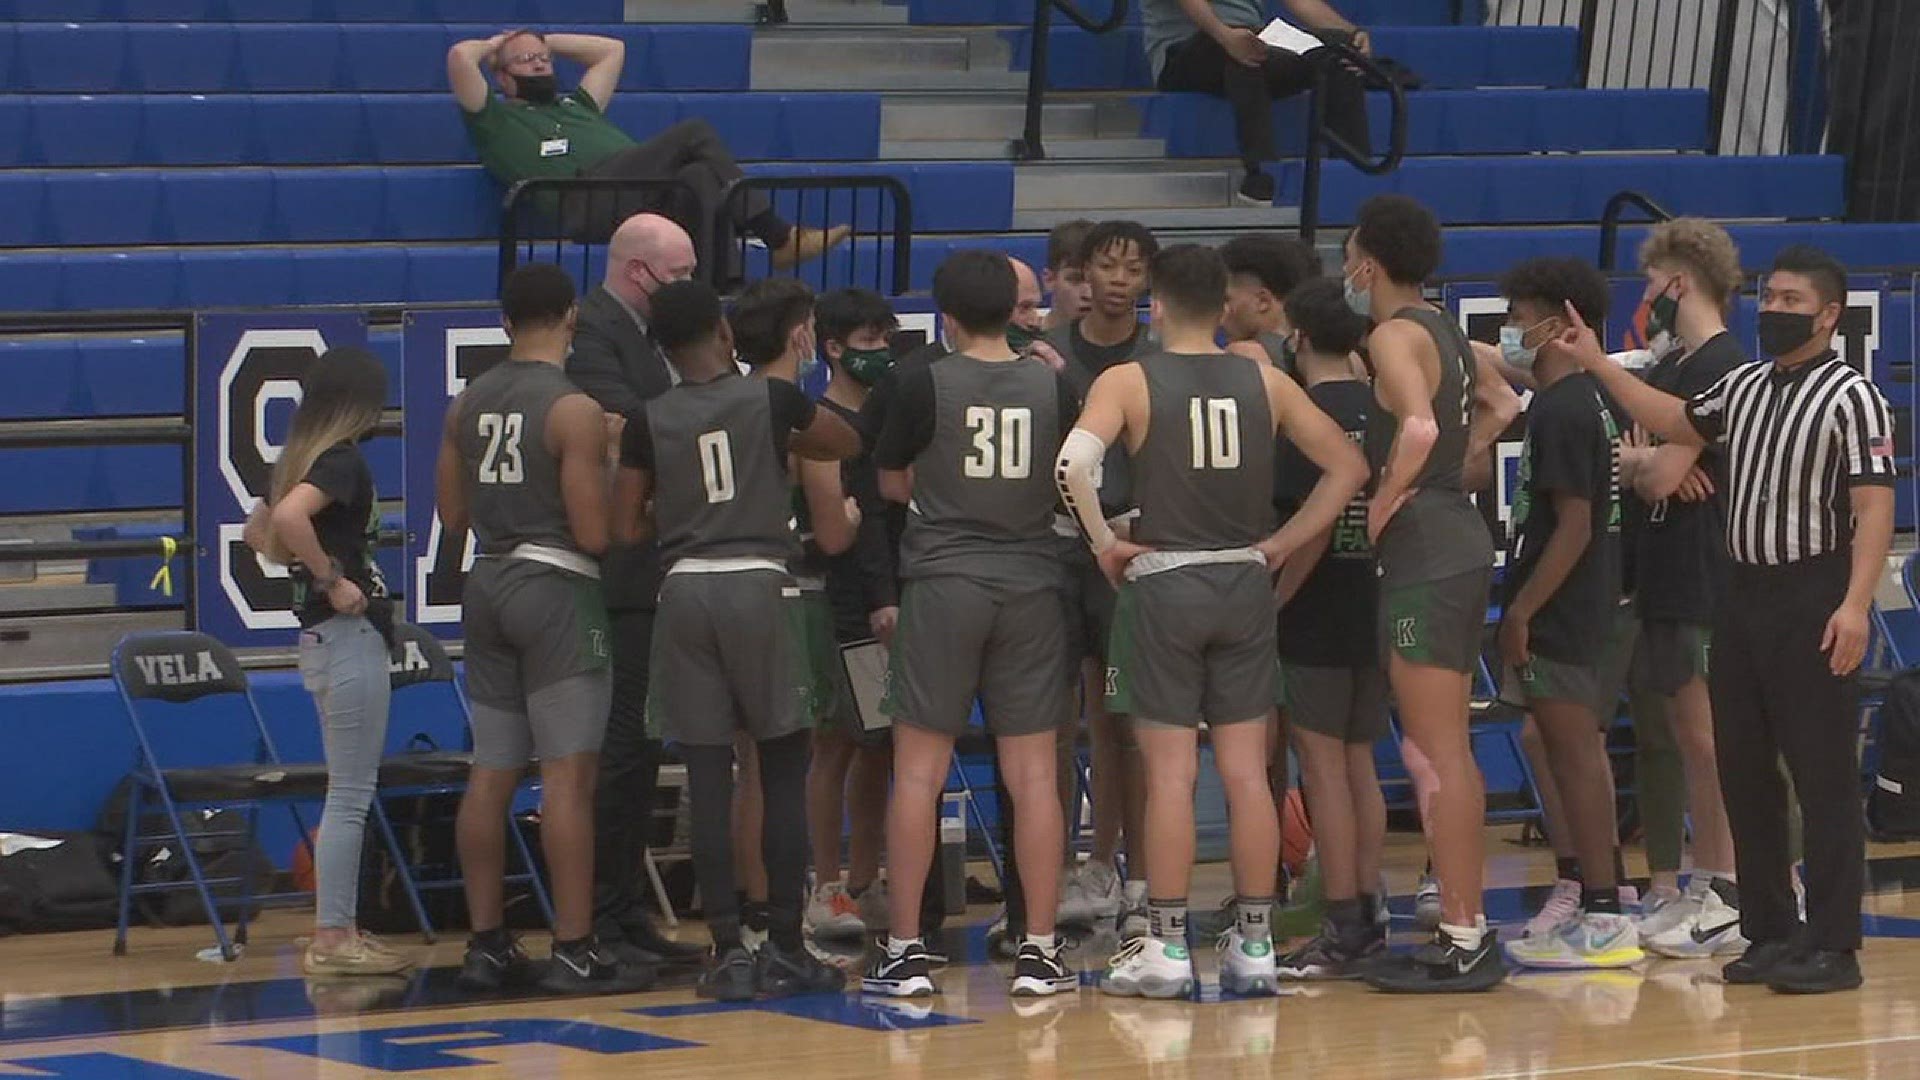 The Mustangs get the opening-round win 74-58. Highlights courtesy KRGV-TV.